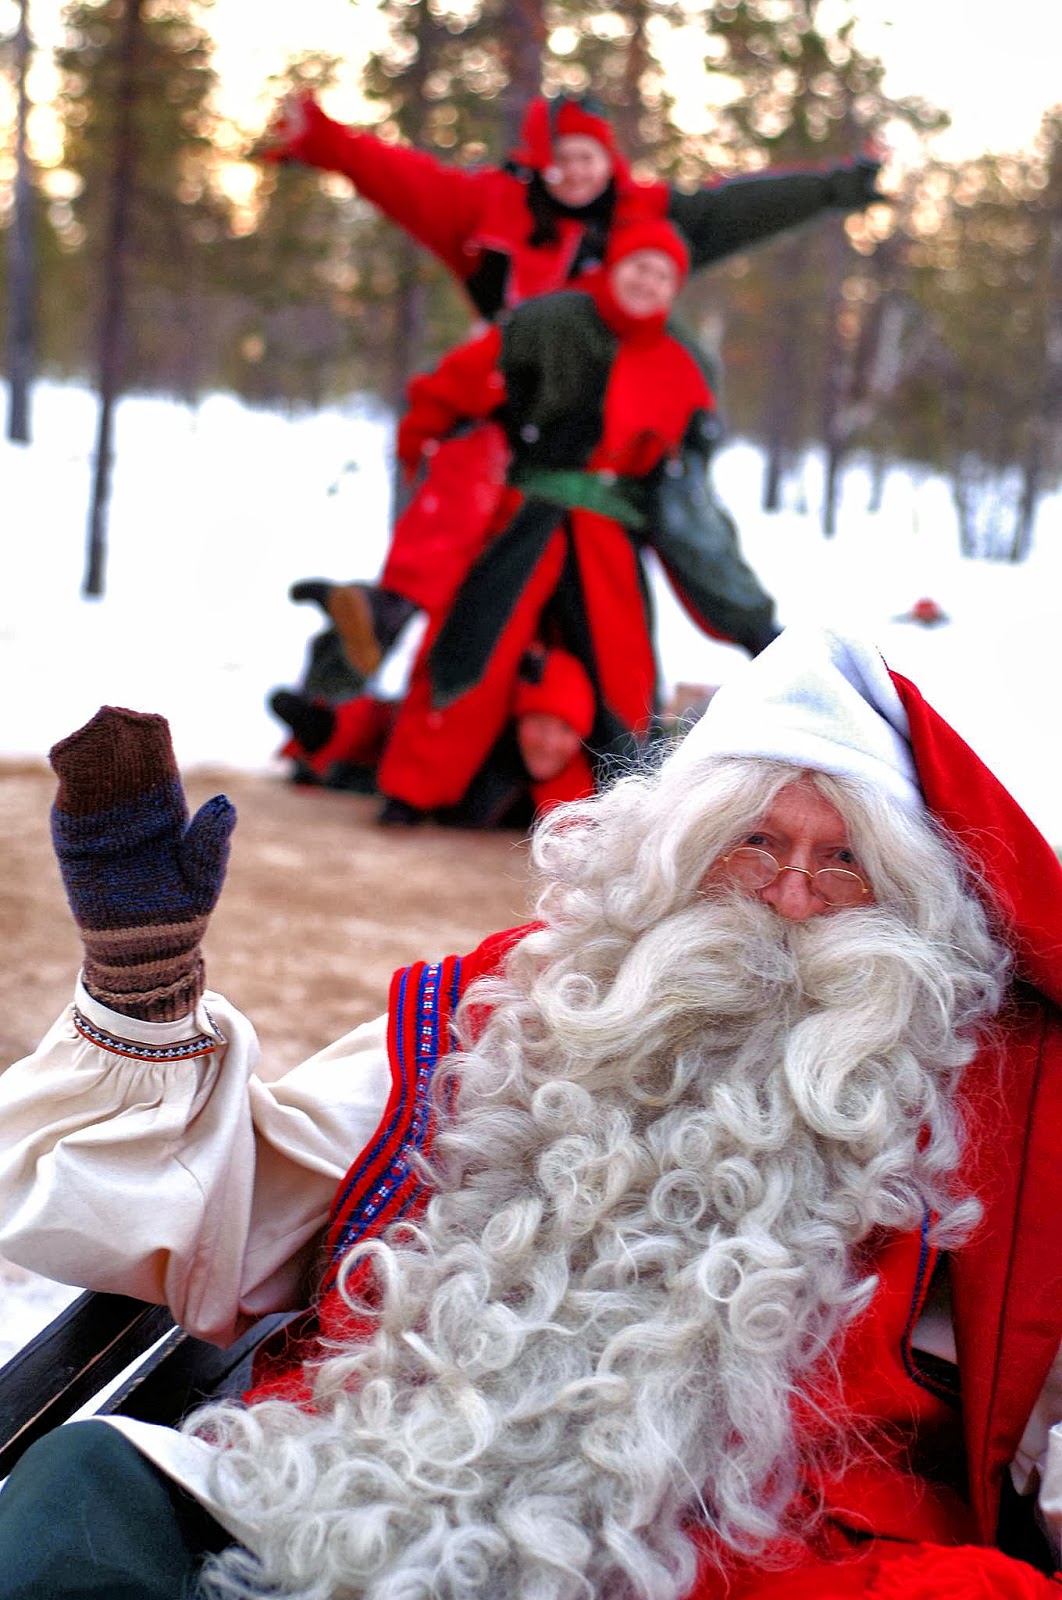 Did you know that Lapland is the home to Father Christmas